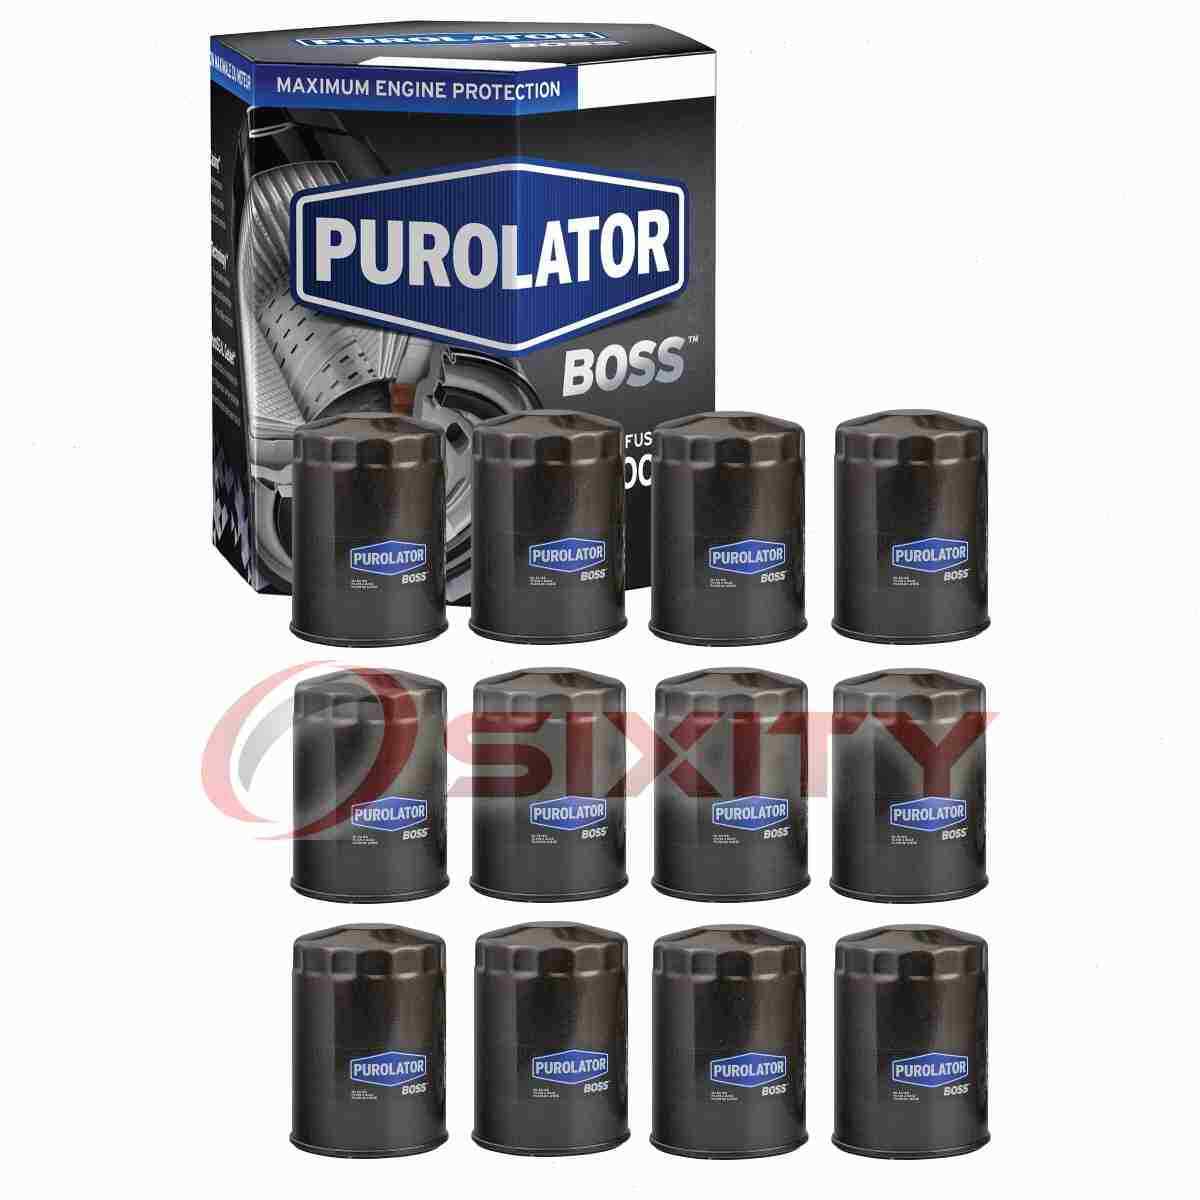 12 pc Purolator BOSS PBL35399 Engine Oil Filters for Oil Change Lubricant te